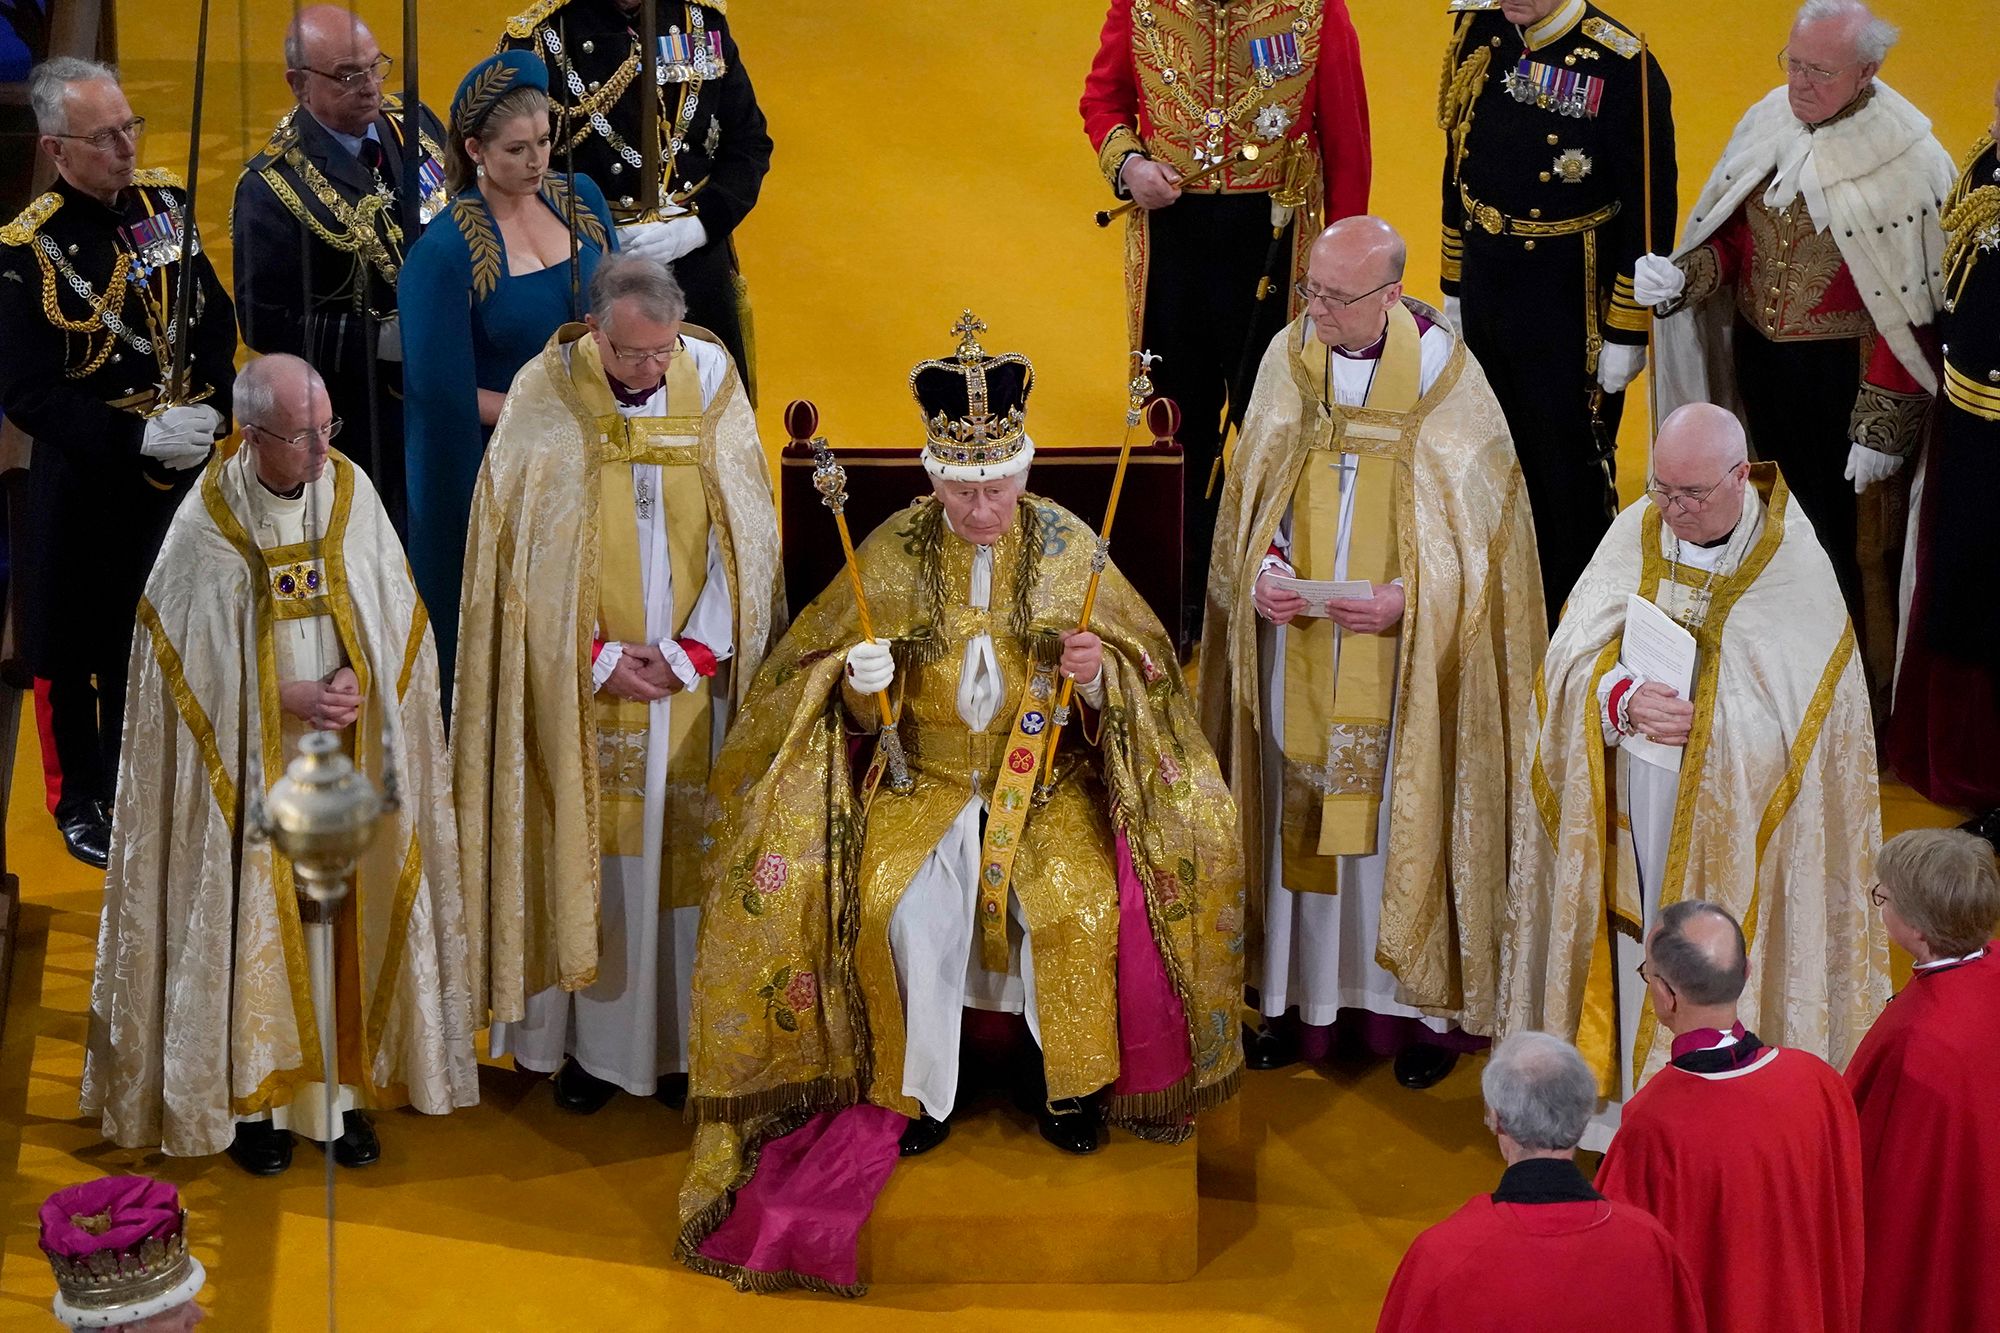 Charles III is crowned in once-in-a-generation ceremony